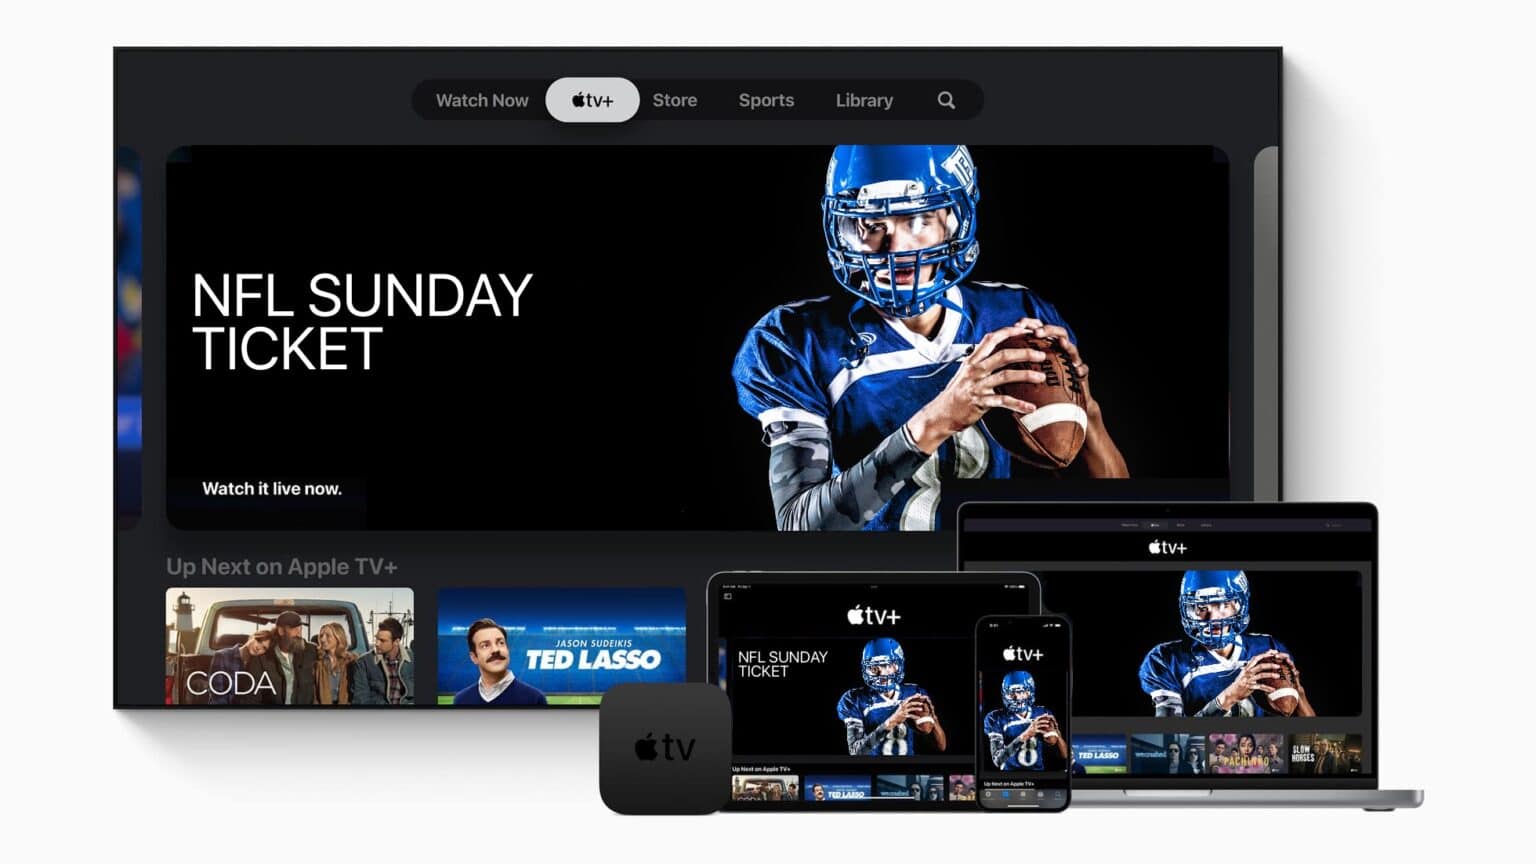 NFL could pass Sunday football games to Apple TV+